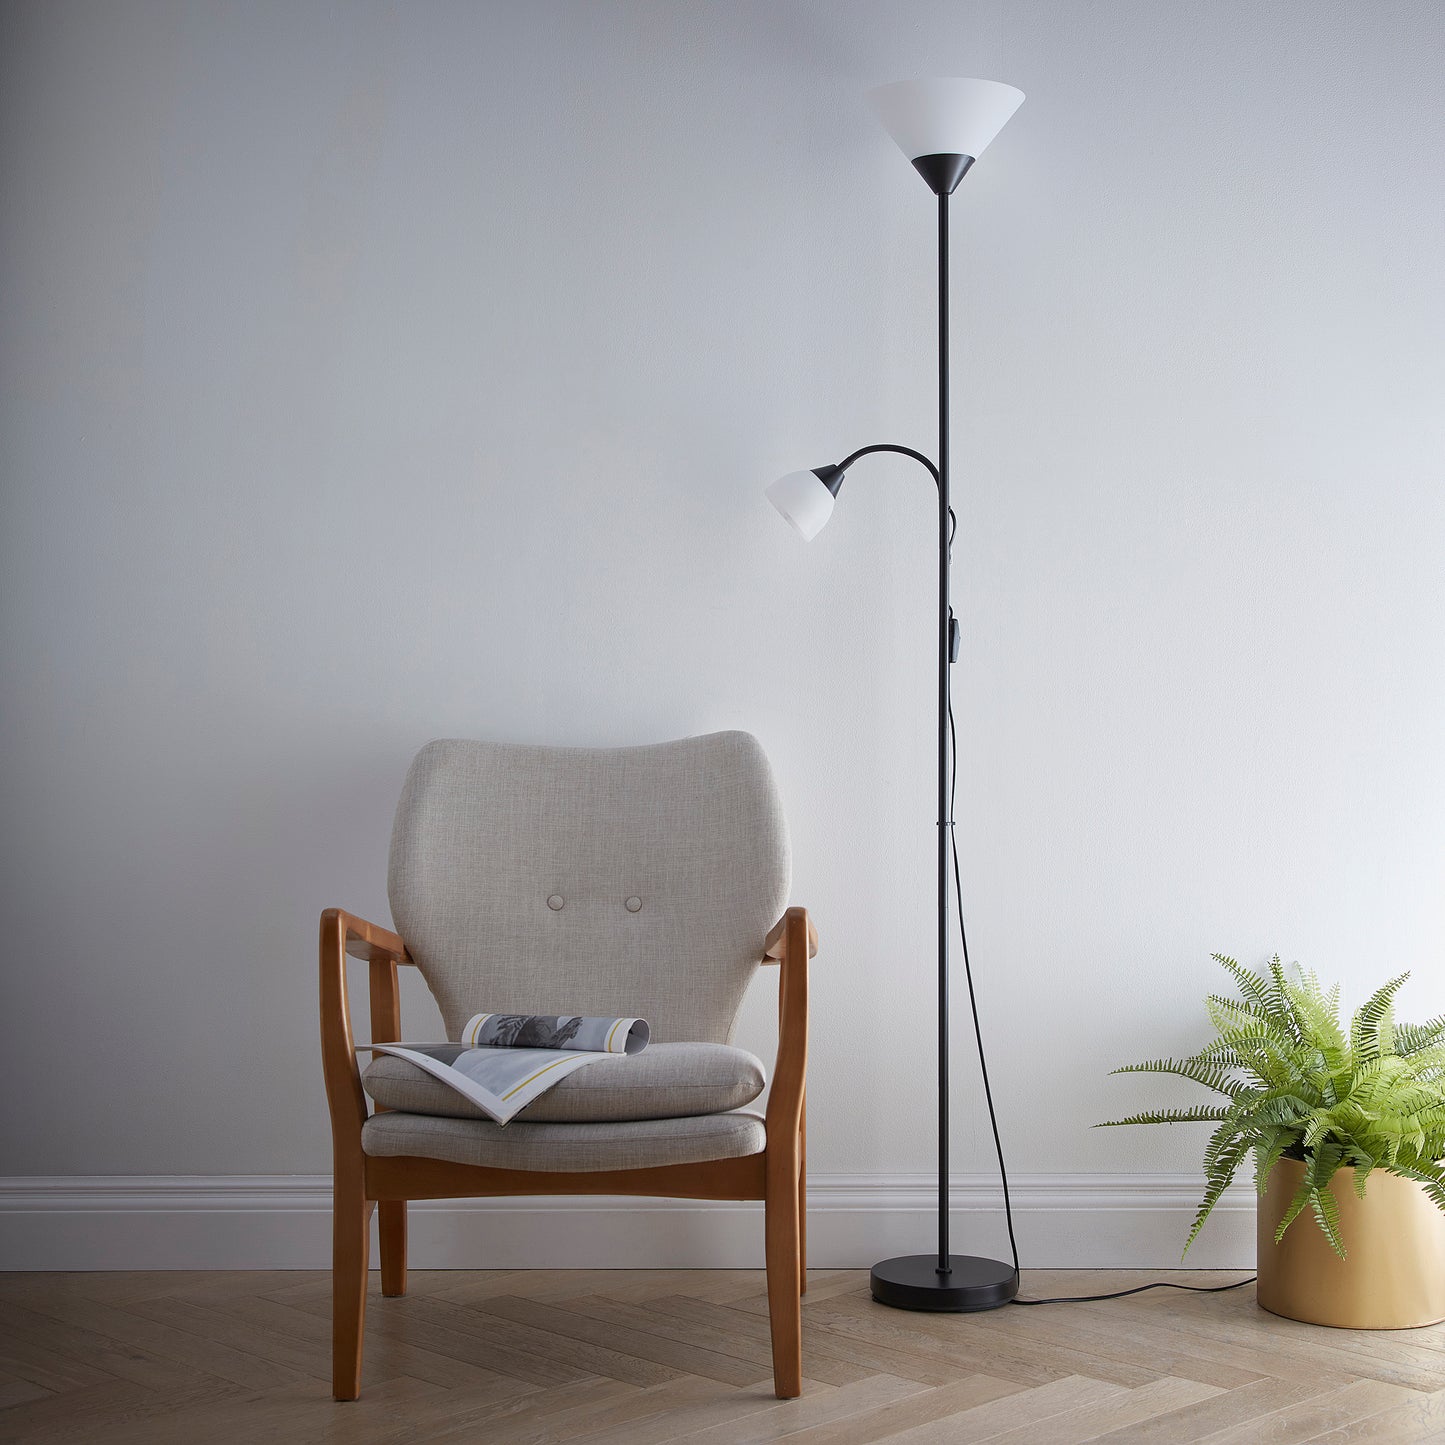 Black Floor Lamp with White Frosted Shades, Mother and Child Dual Switch Option for On or Off